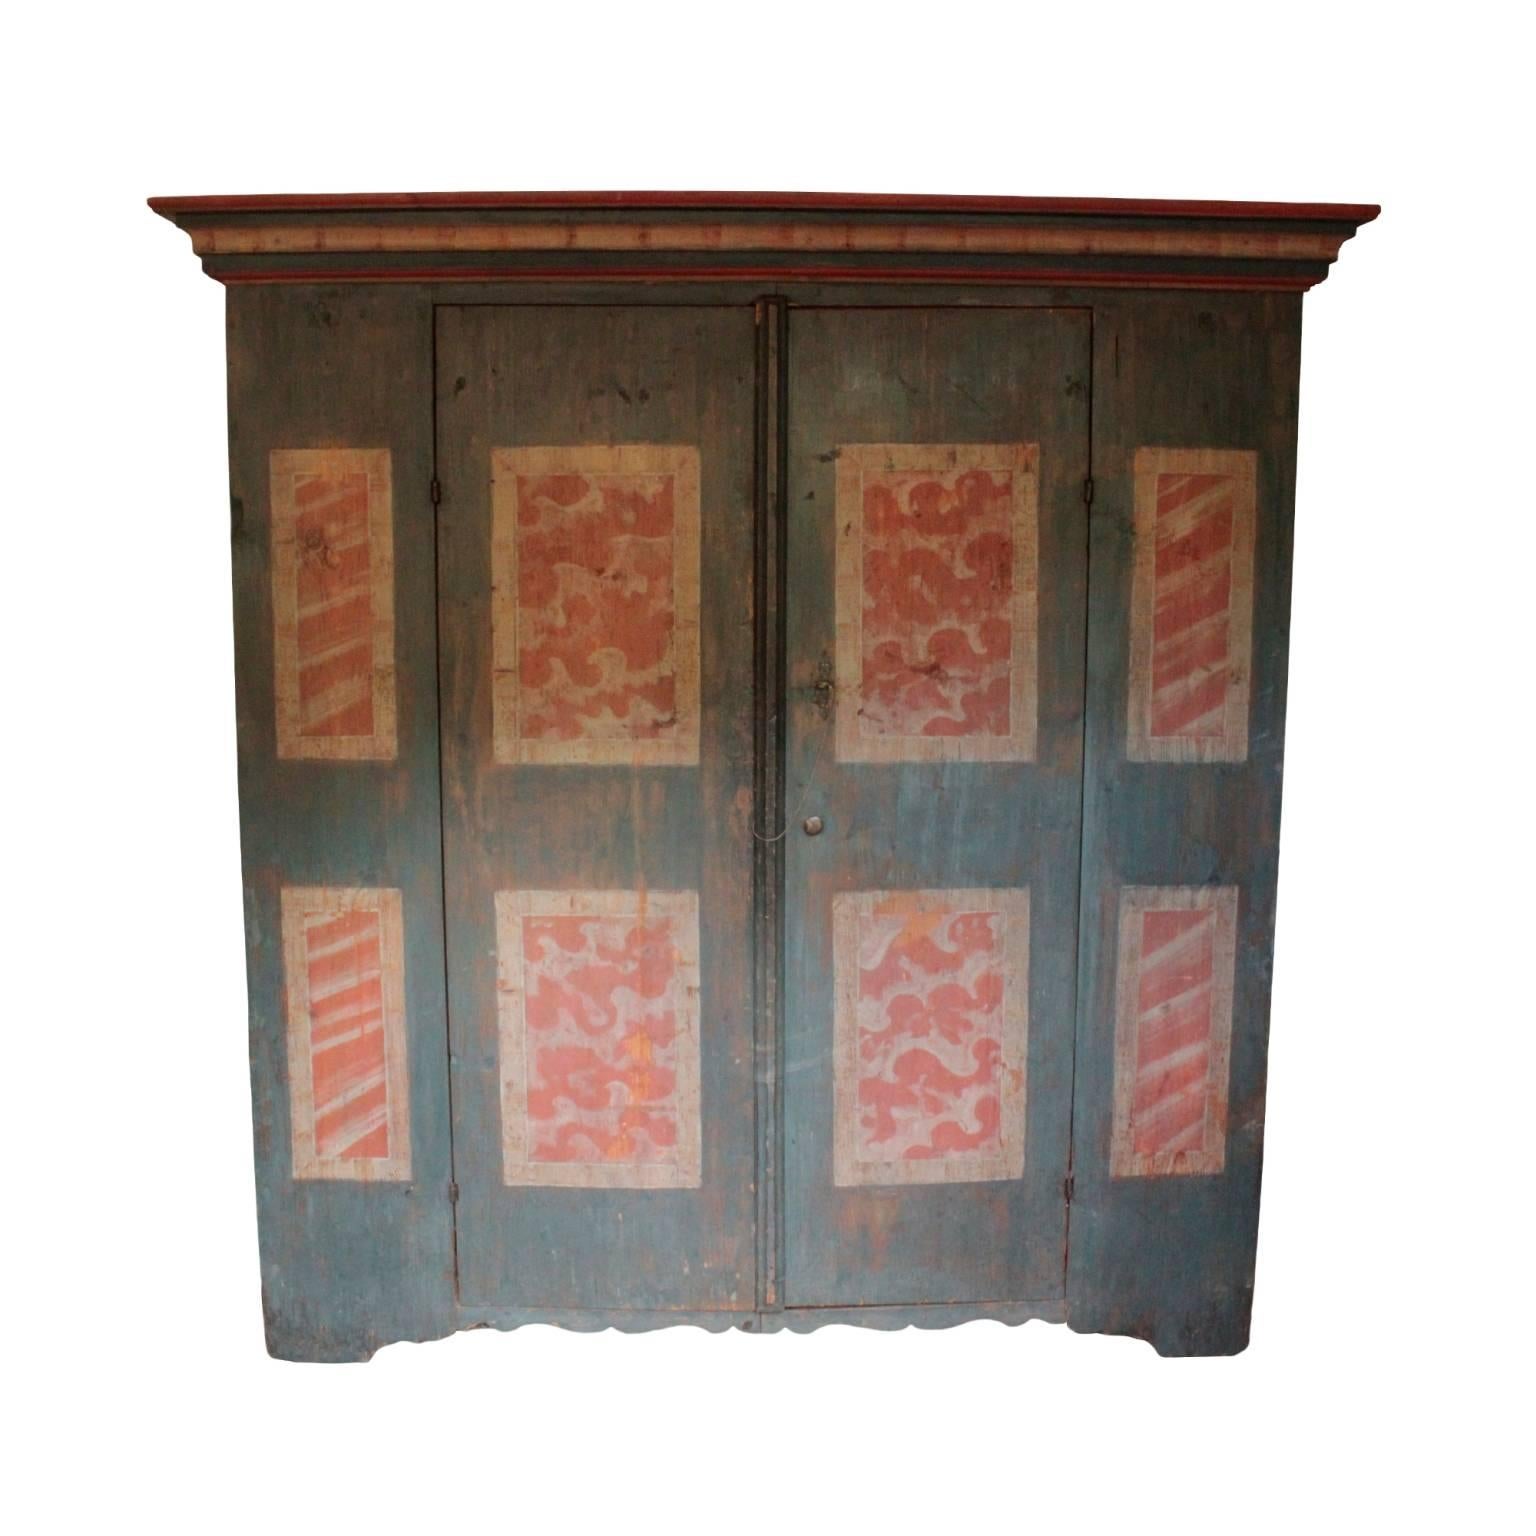 Effervescent Swedish painted cabinet having a pair of doors enclosing three shelves with curvaceous front edges and two bottom drawers with original leather strap pulls. Corresponding curvaceous base. In pine, sponge painted in sea blue, Venetian